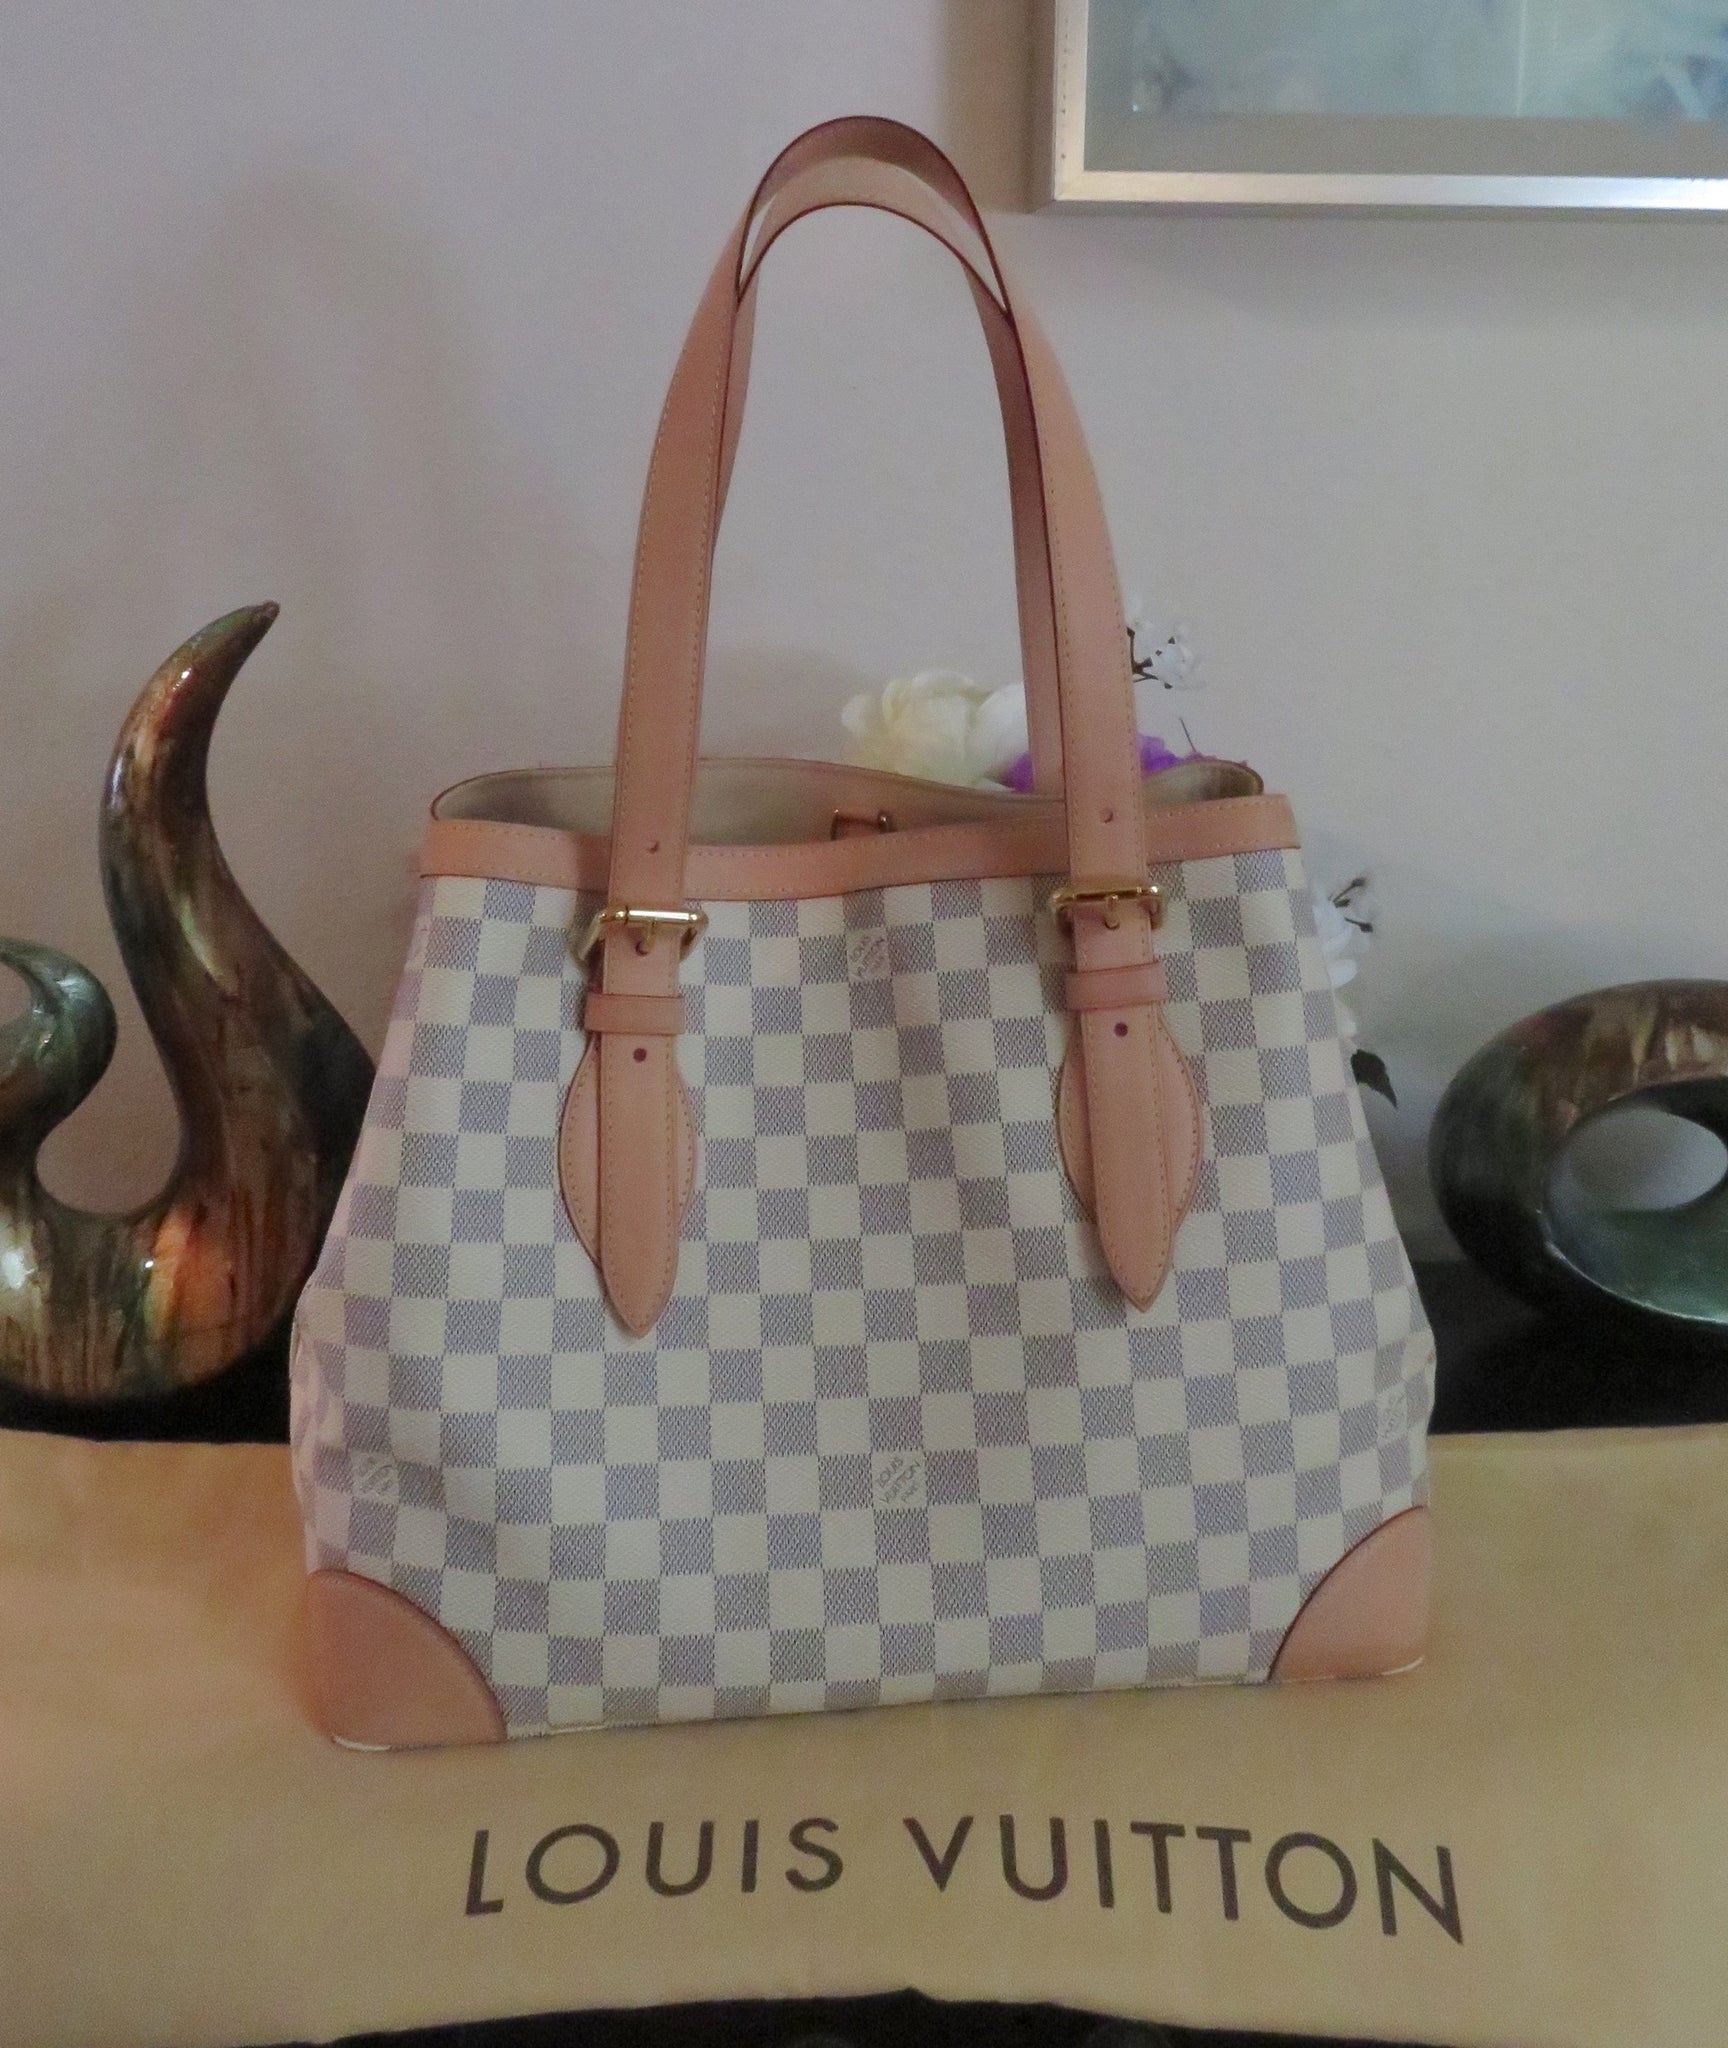 Preowned Louis Vuitton Hampstead Damien Azur bag. See pics for